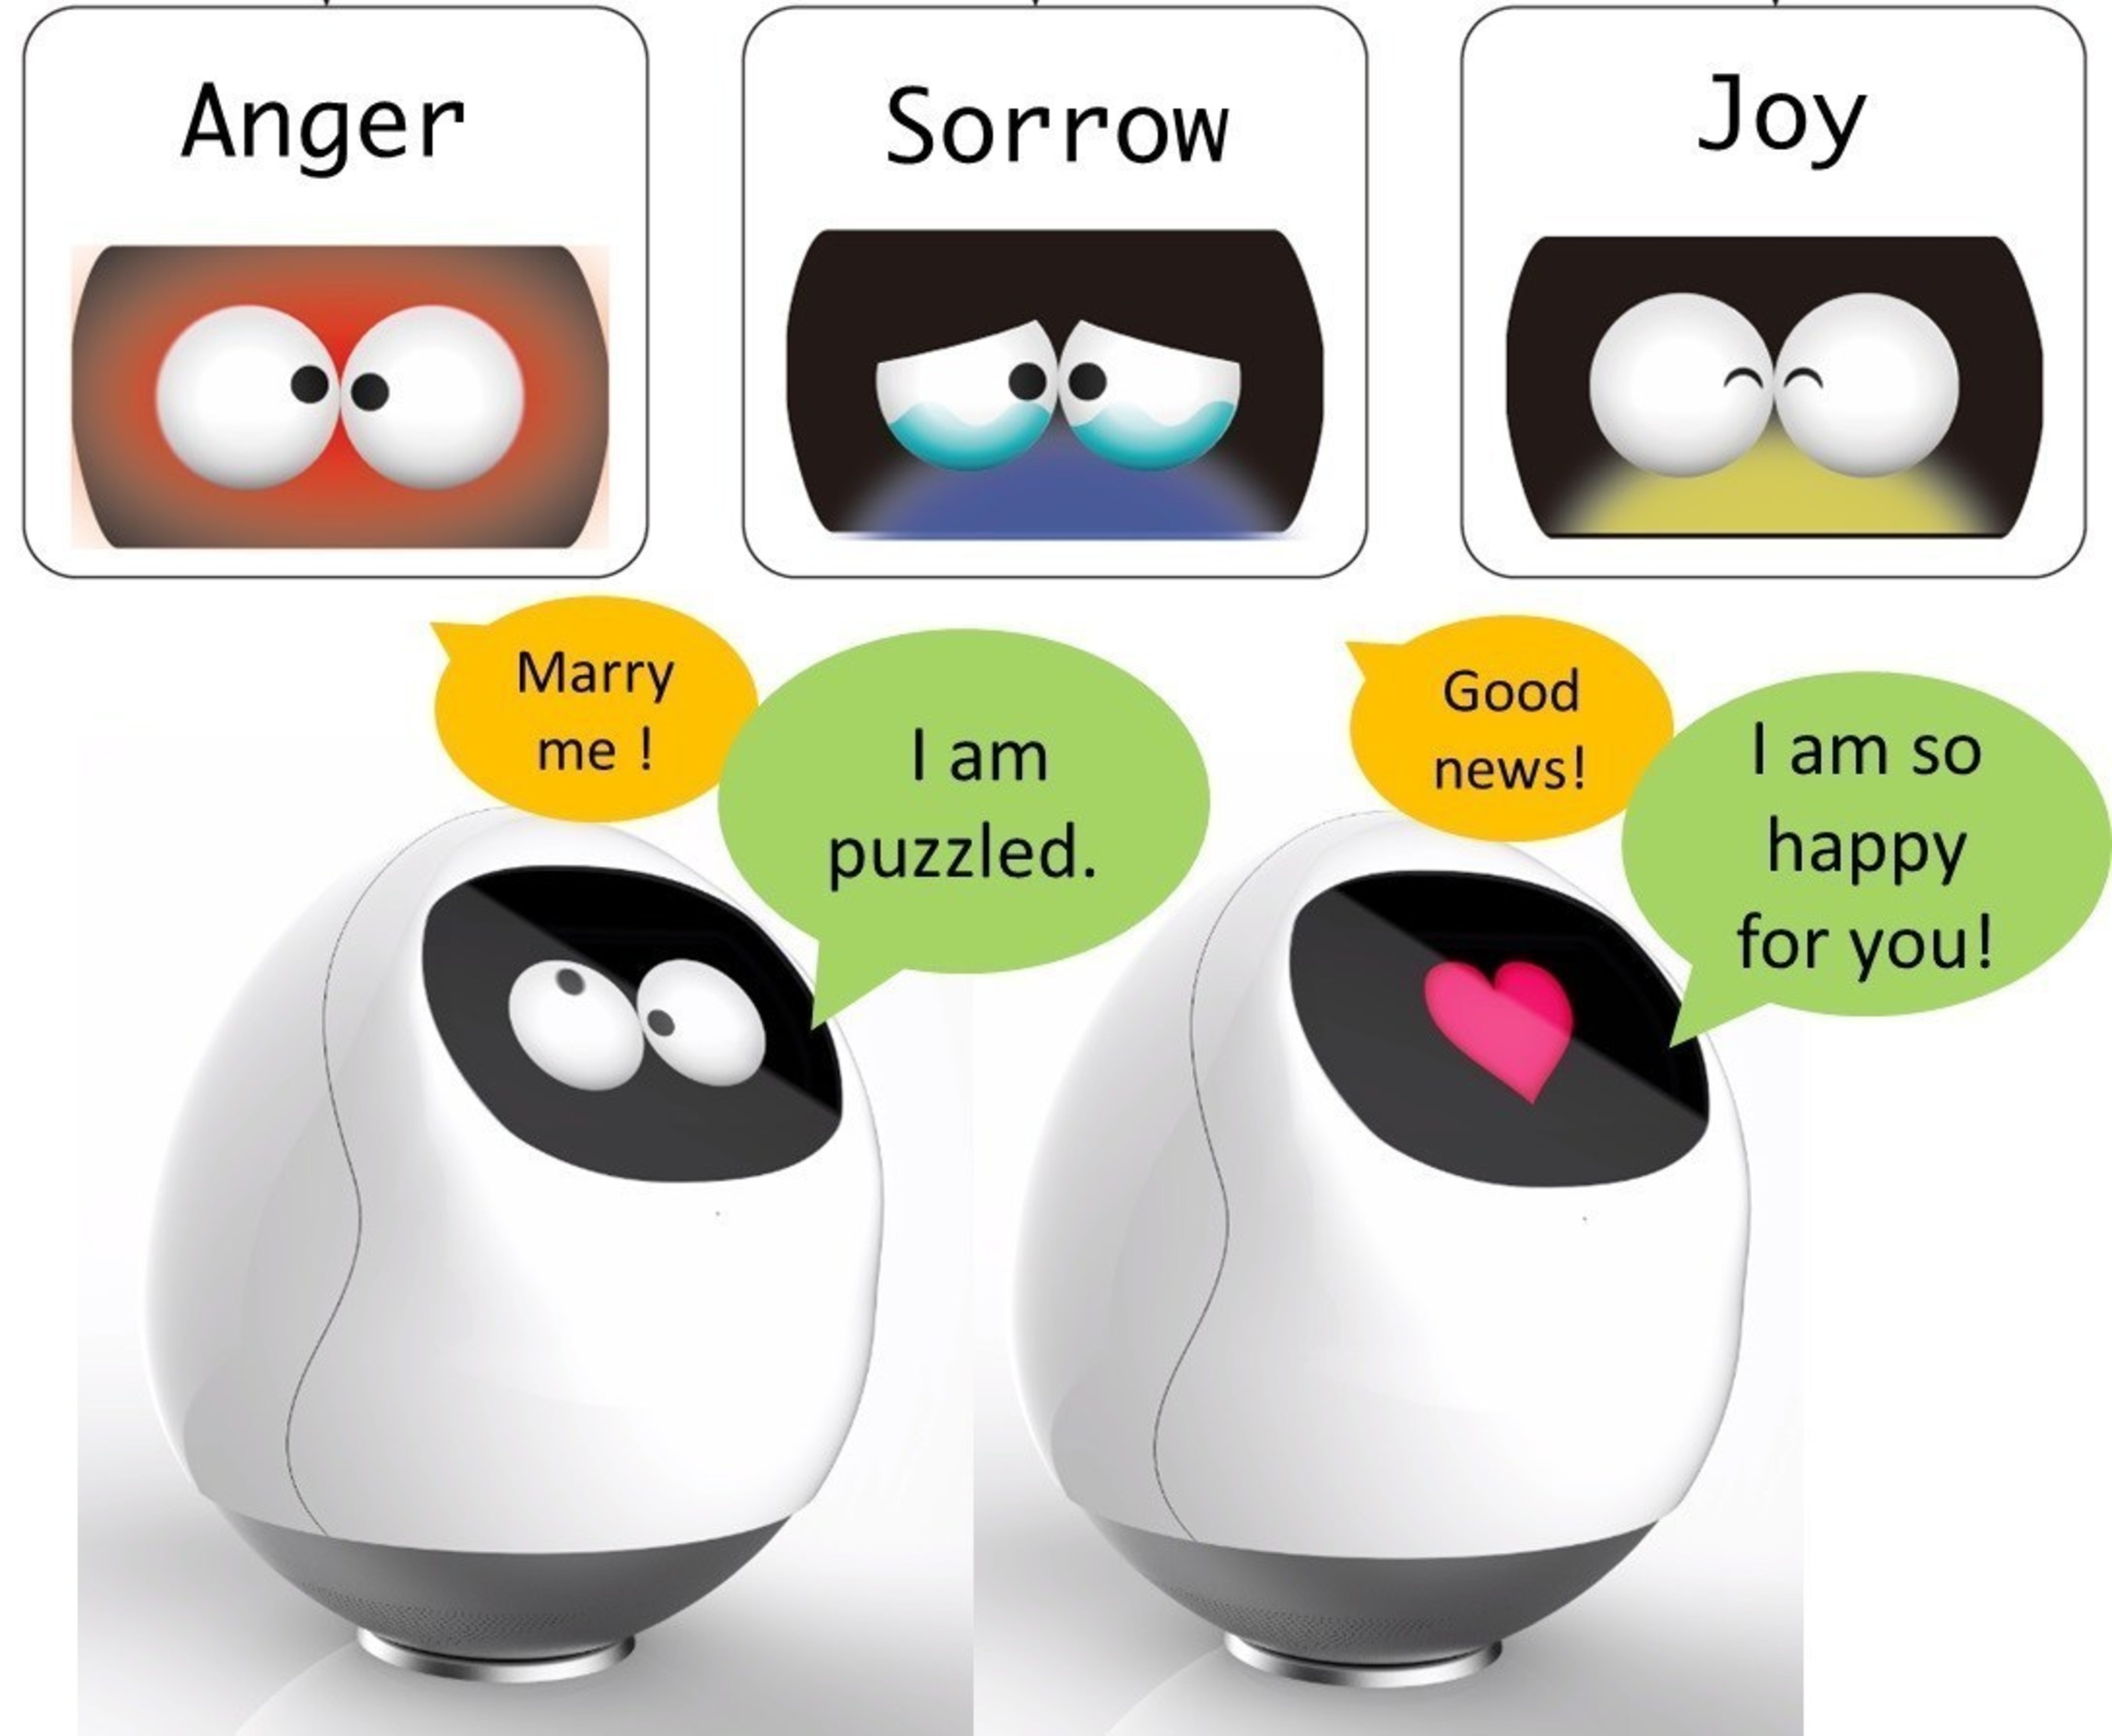 Tapia responds to users based on their emotion, expressing her feelings by the eyes and voice.